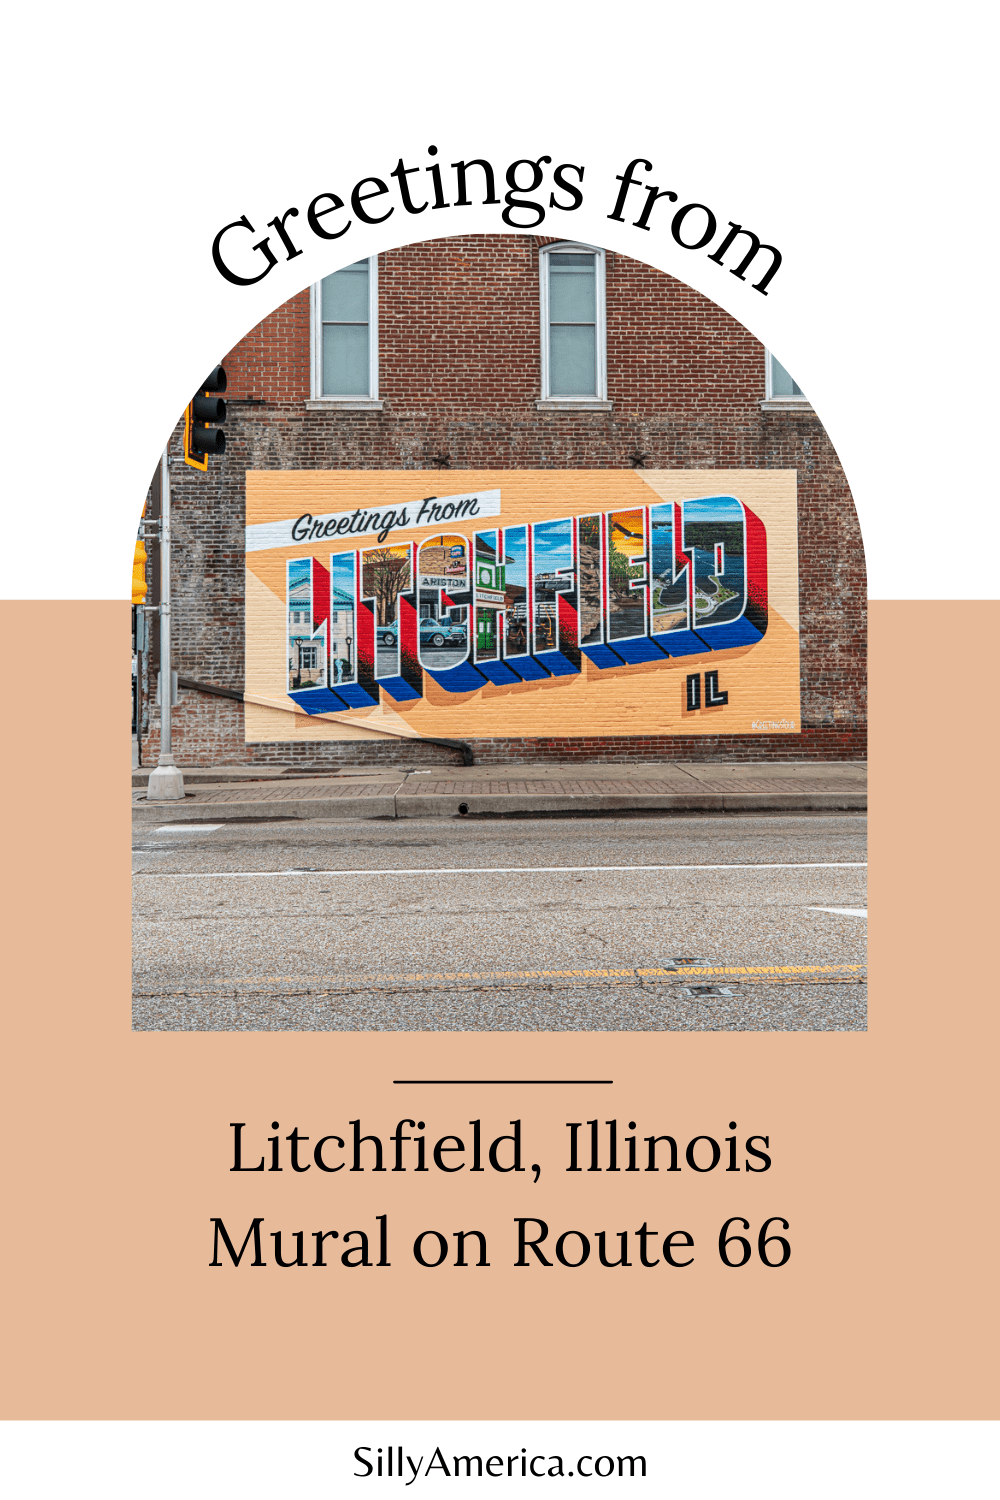 Greetings from Litchfield, Illinois! Visit the Greetings from Litchfield, Illinois postcard-style mural on your Route 66 road trip. Visit this Greetings Tour mural on an Illinois vacation - add the roadside attraction to your travel itinerary!  #RoadTrips #RoadTripStop #Route66 #Route66RoadTrip #IllinoisRoute66 #Illinois #IllinoisRoadTrip #IllinoisRoadsideAttractions #RoadsideAttractions #RoadsideAttraction #RoadsideAmerica #RoadTrip